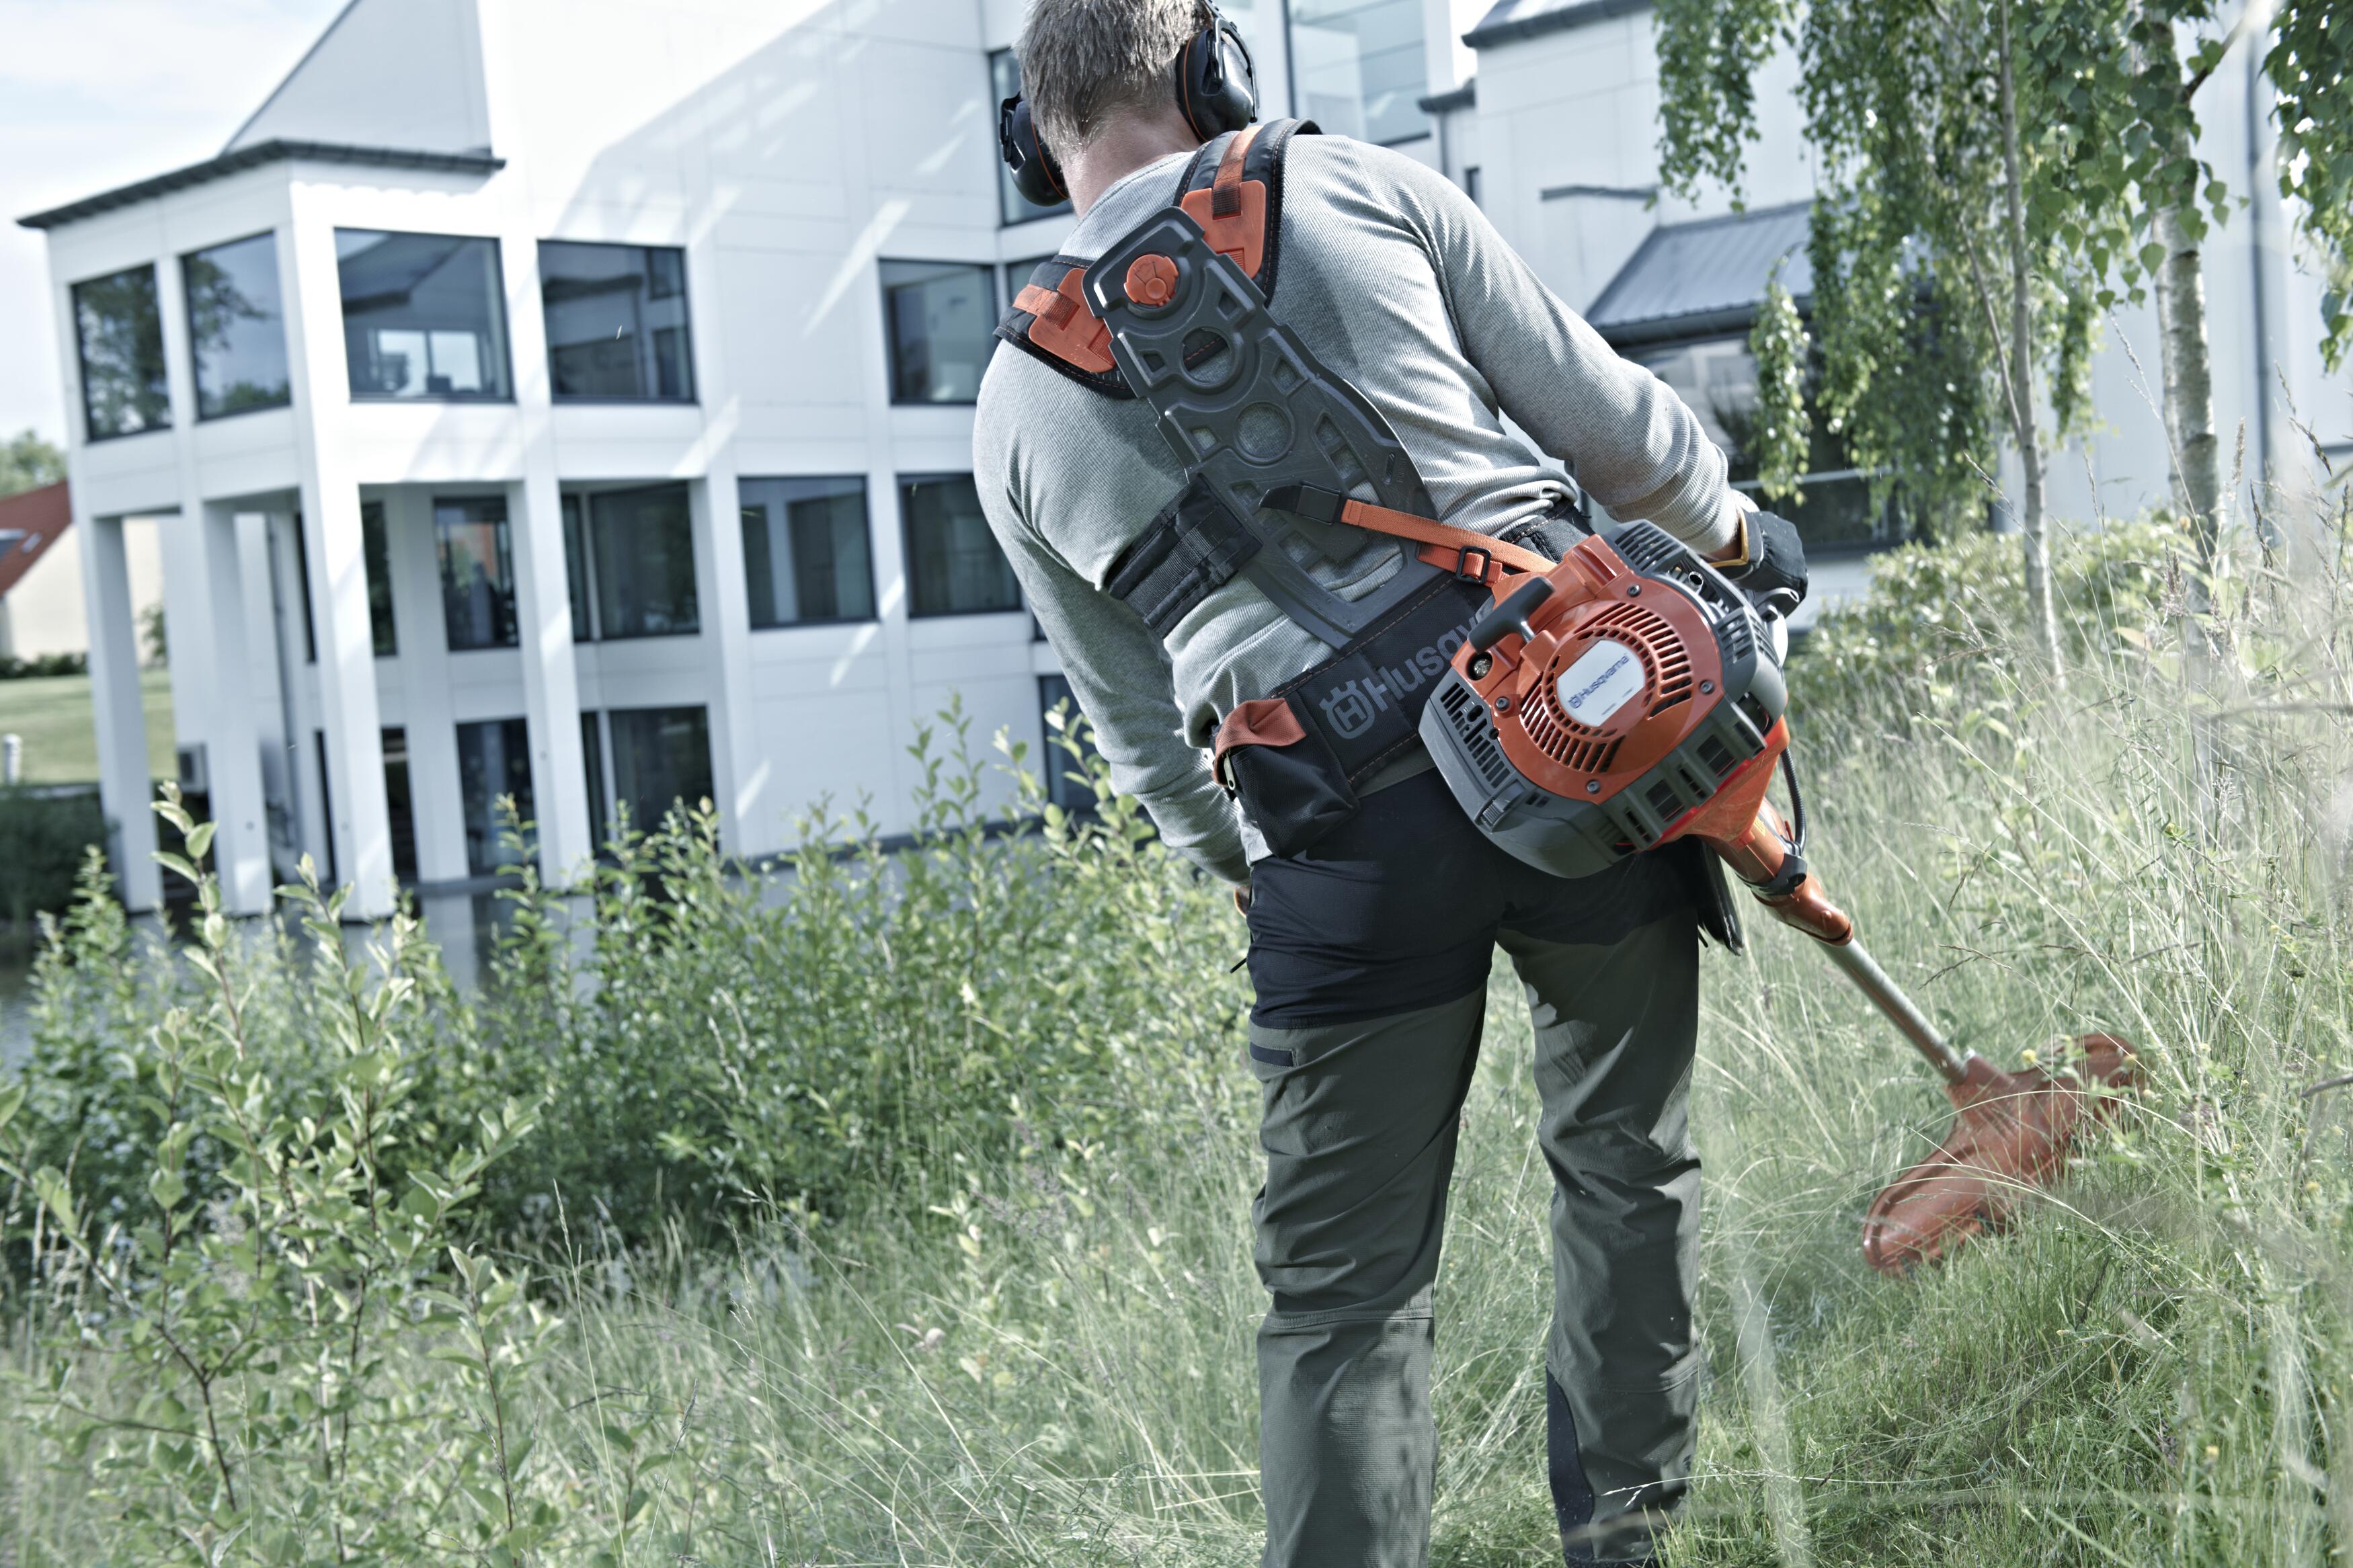 With a brushcutter from Husqvarna your operations will feel ergonomic, balanced and comfortable